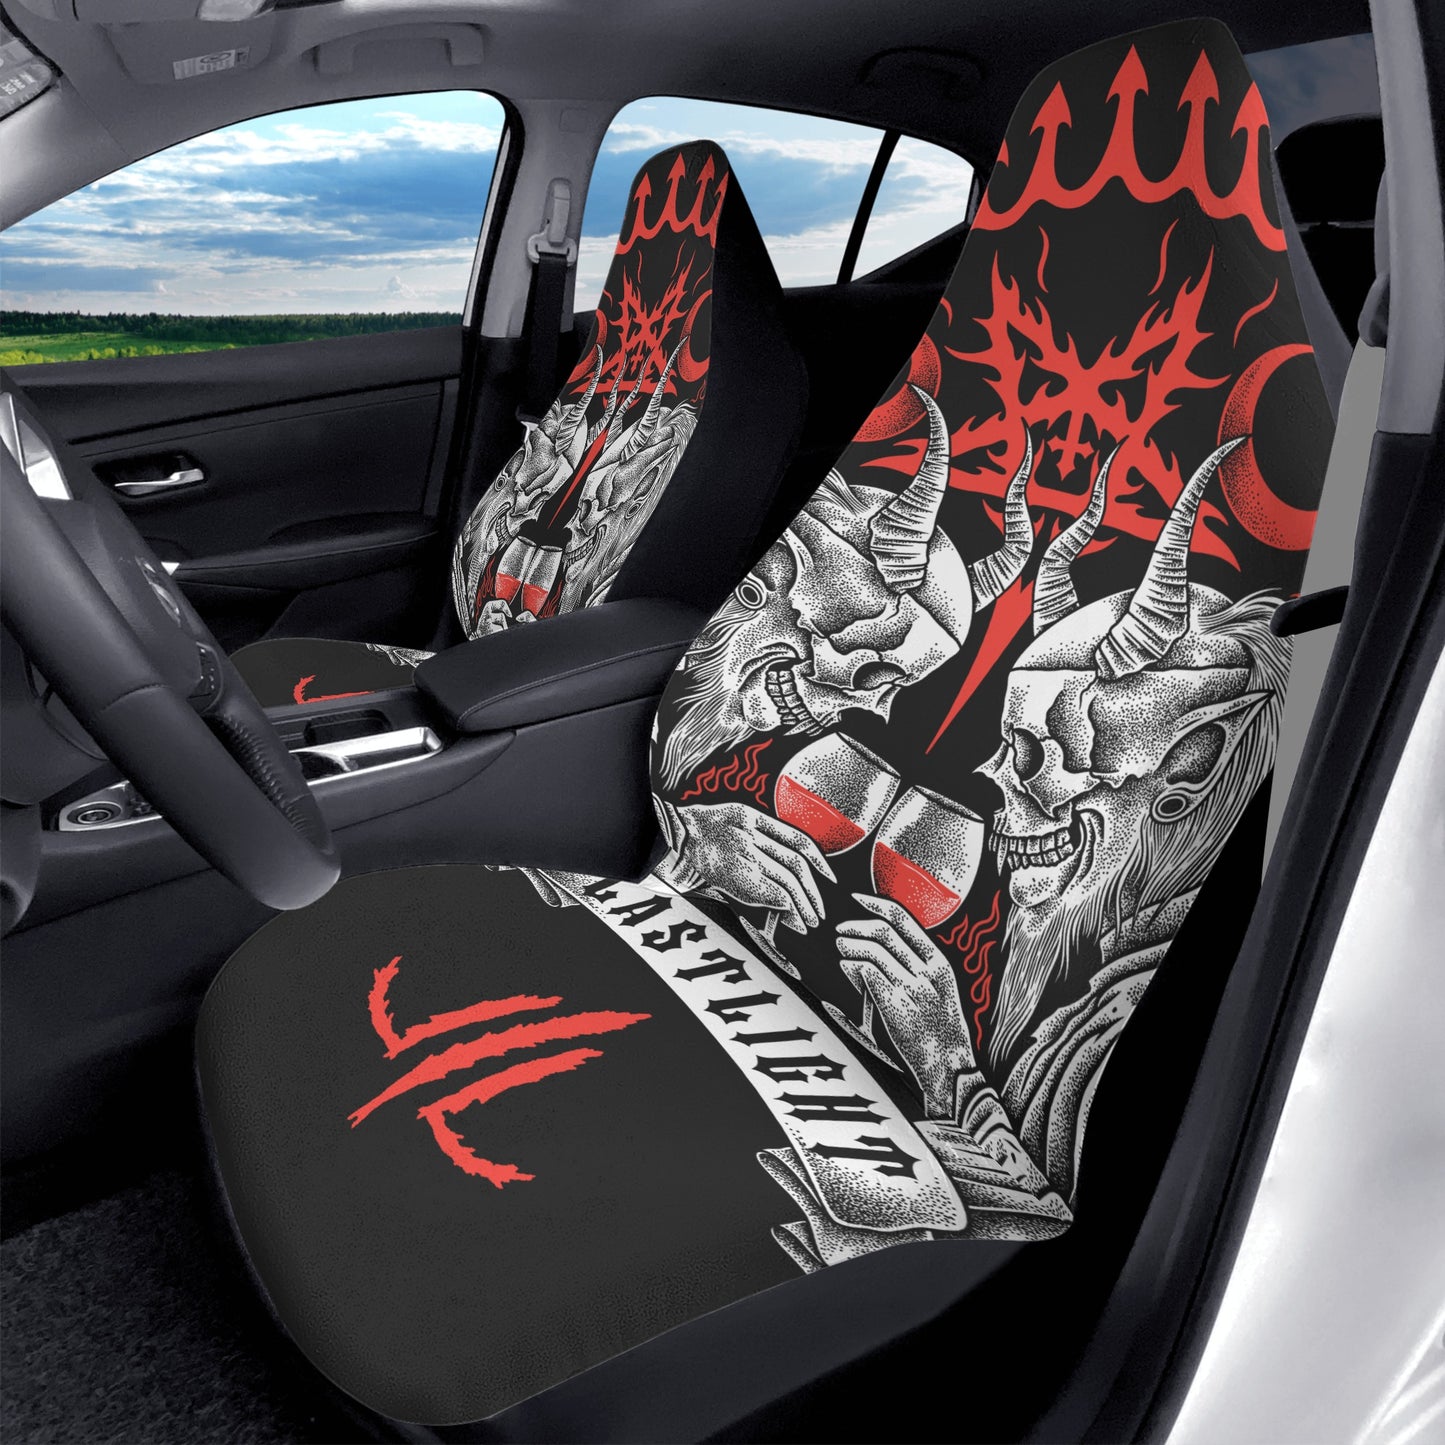 Cheers The Devil Car Seat Covers (2 Pcs)